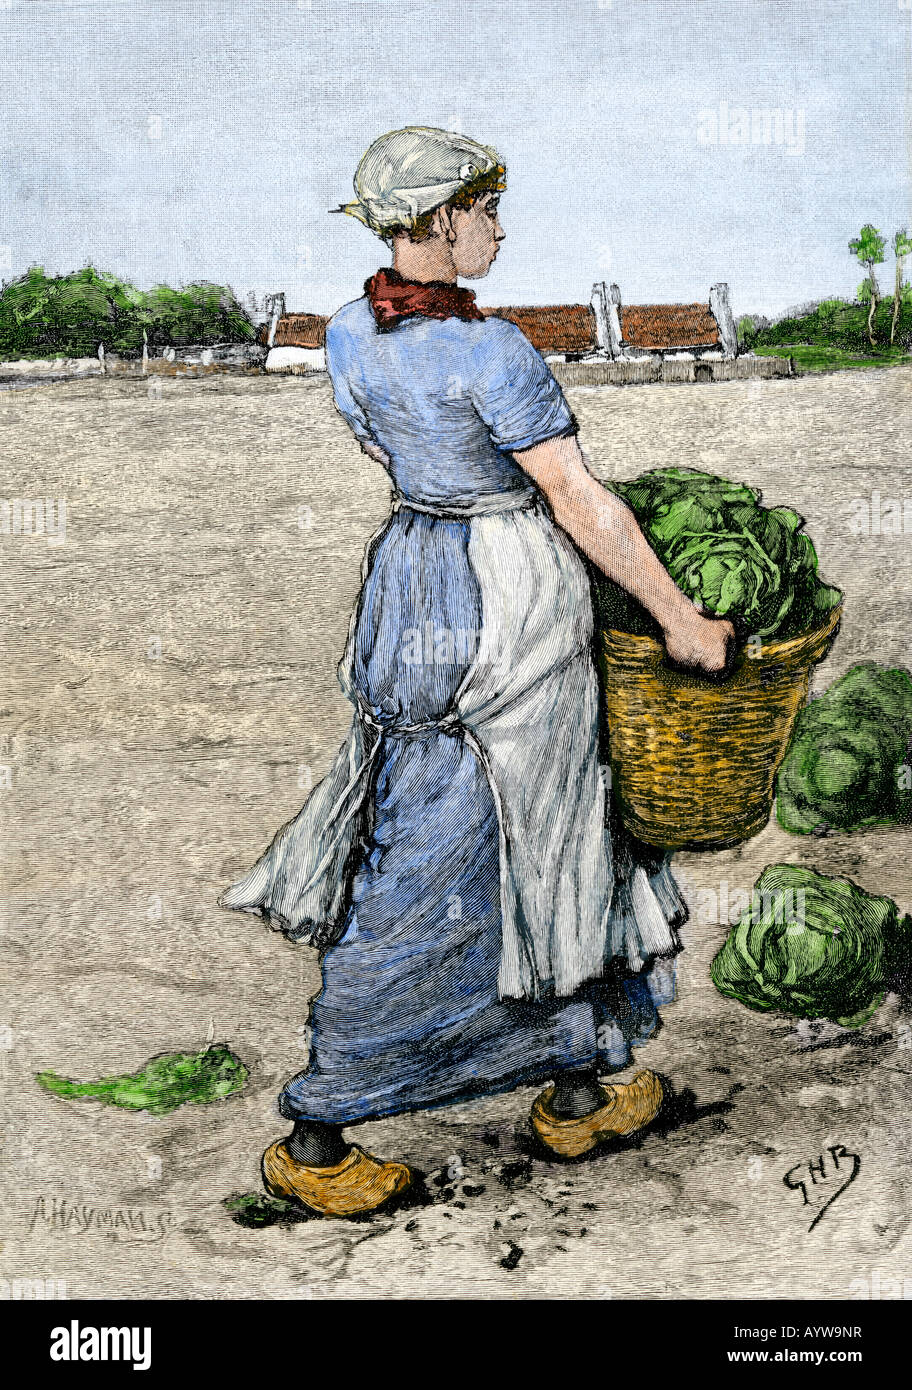 Young Dutch woman gathering cabbages in a basket 1800s. Hand-colored woodcut Stock Photo